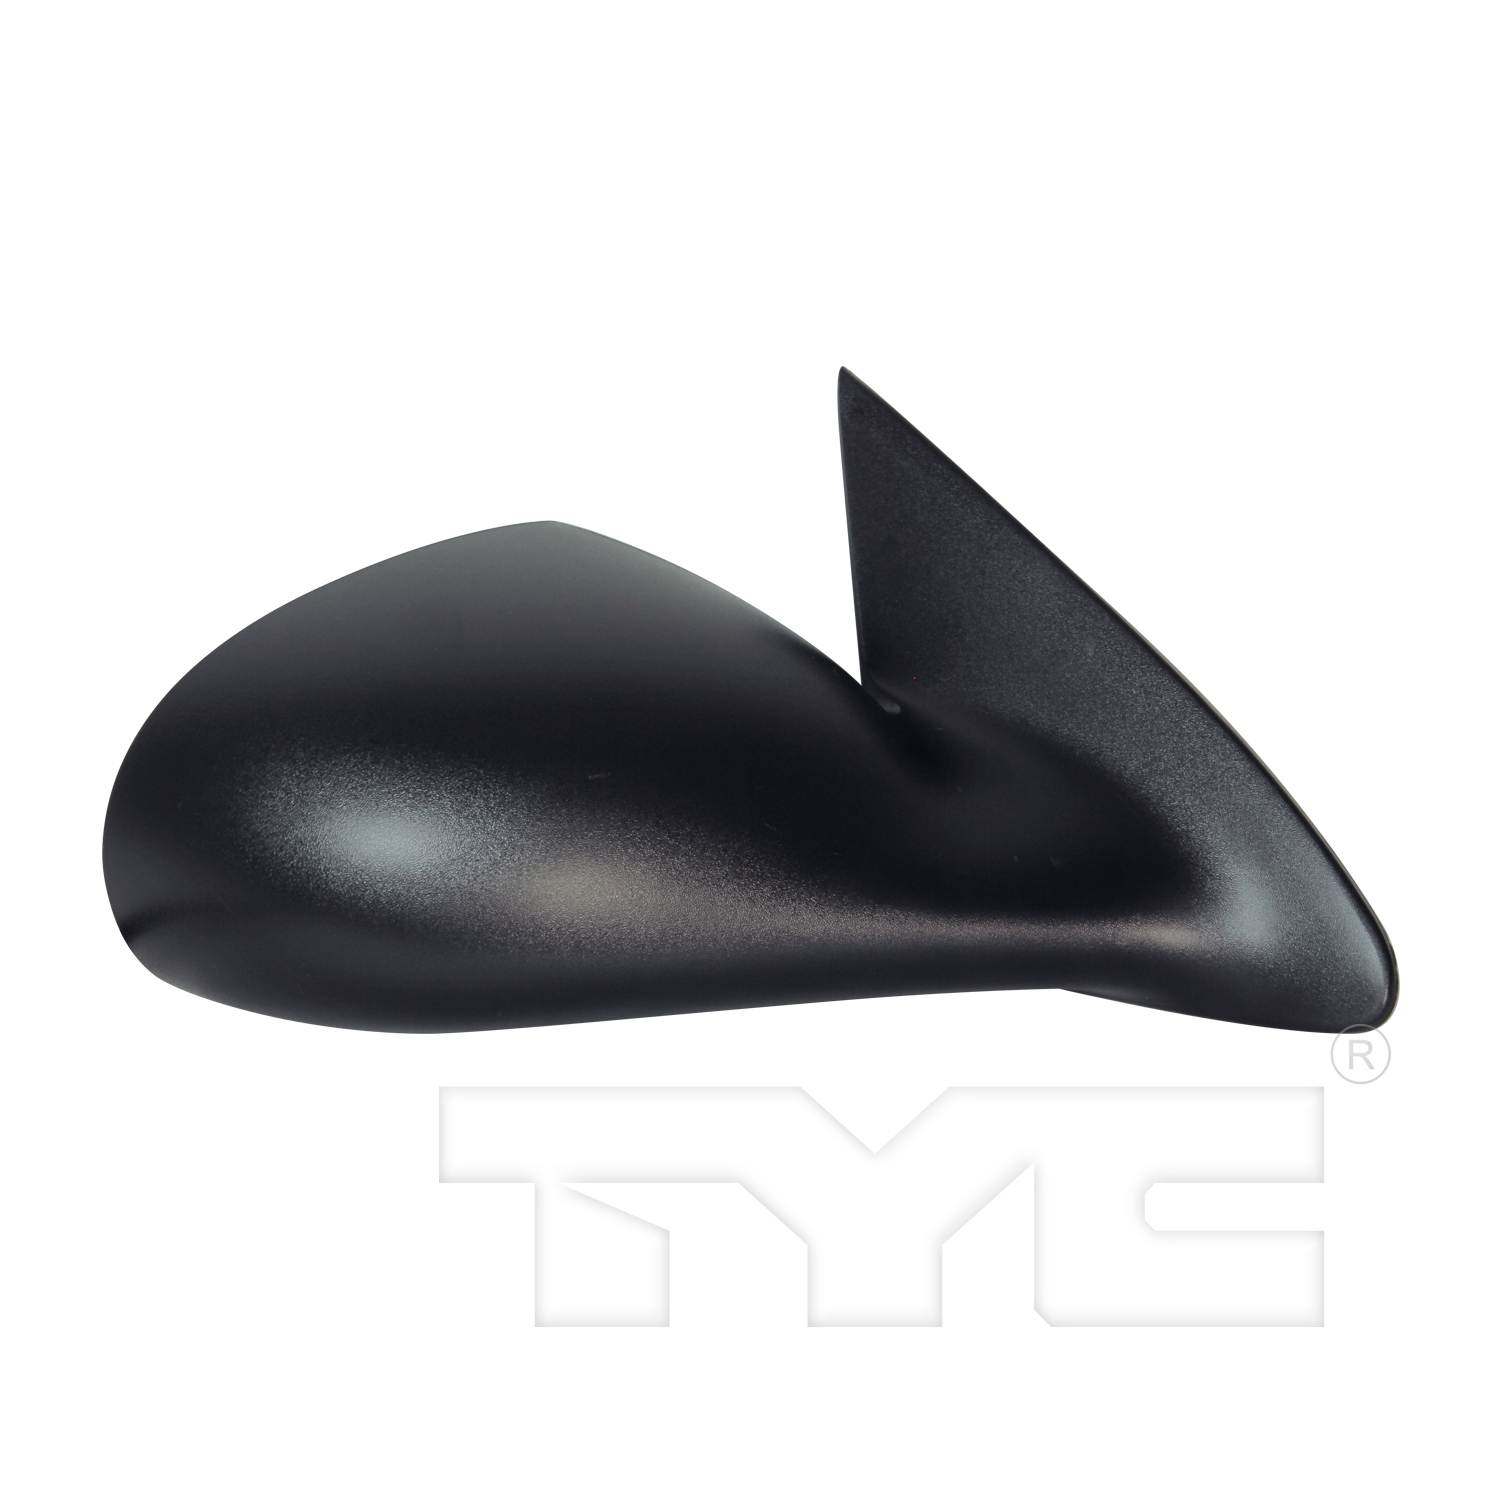 Aftermarket MIRRORS for DODGE - INTREPID, INTREPID,98-00,RT Mirror outside rear view